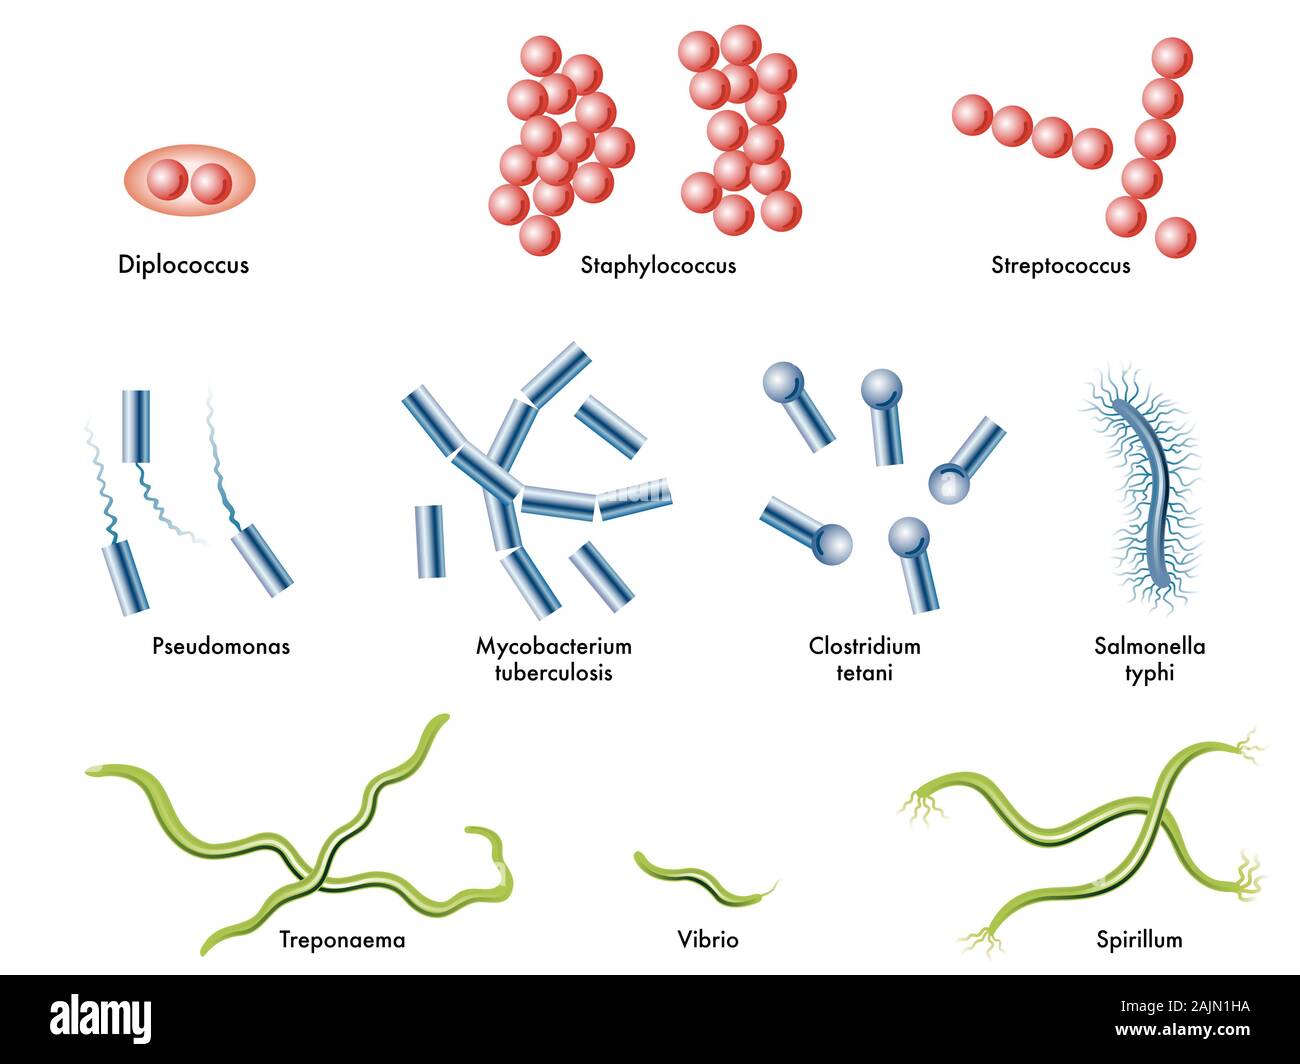 Medical illustration of some types of bacteria. Stock Photo